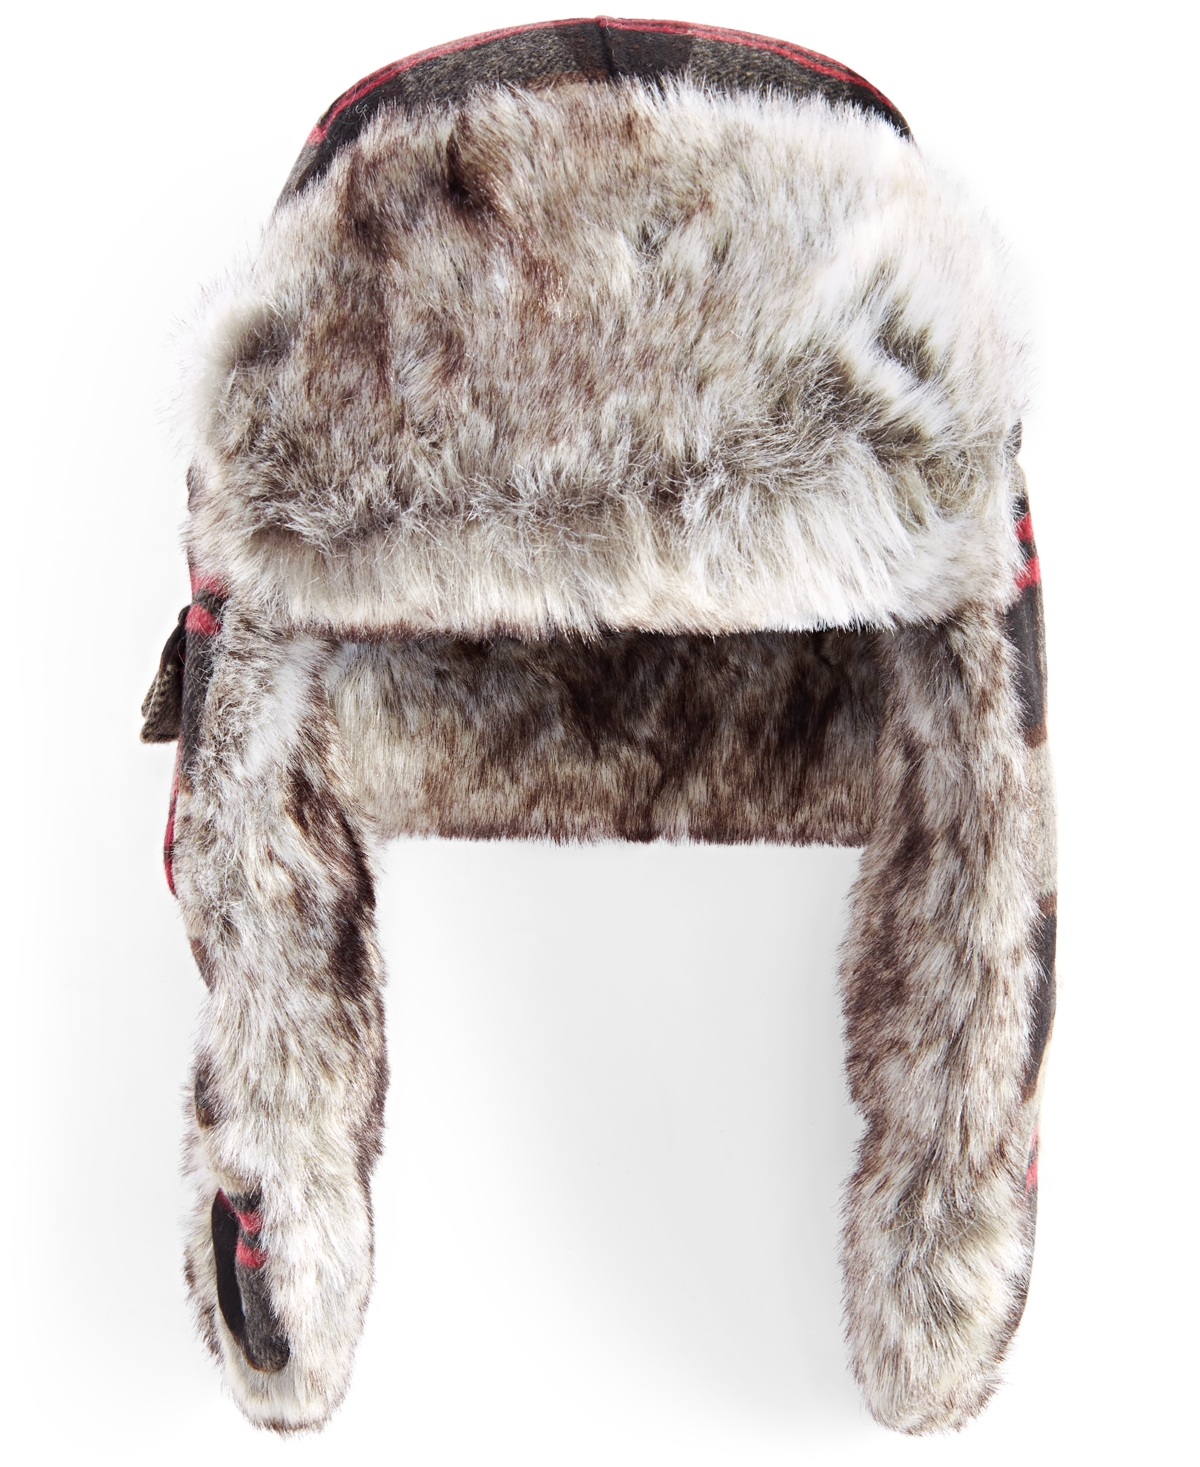 Men's Plaid Trapper Hat with Faux-Fur Lining & Trim - Red/Grey